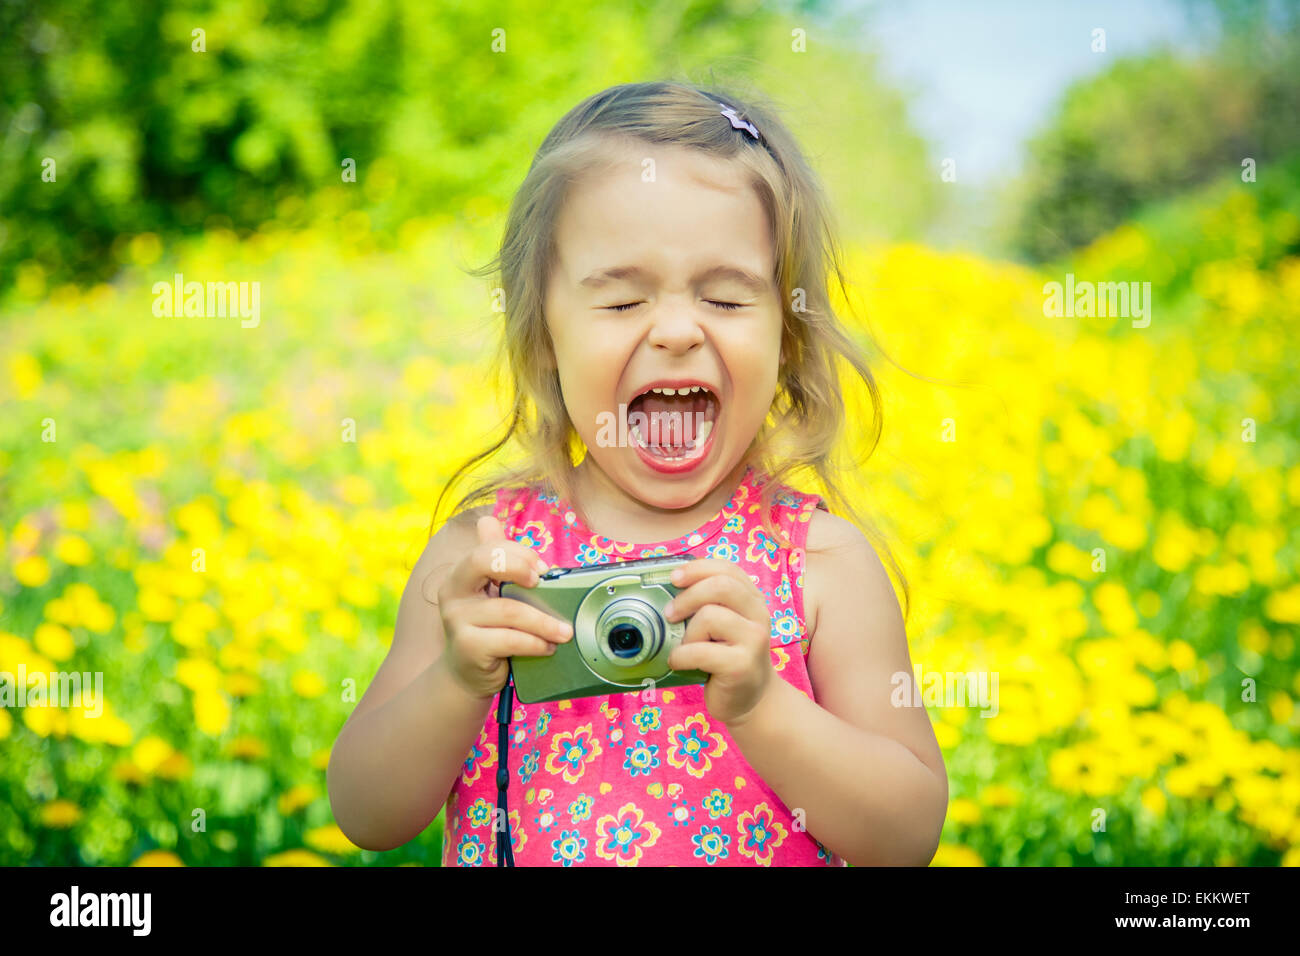 Little girl taking pictures on a meadow Stock Photo